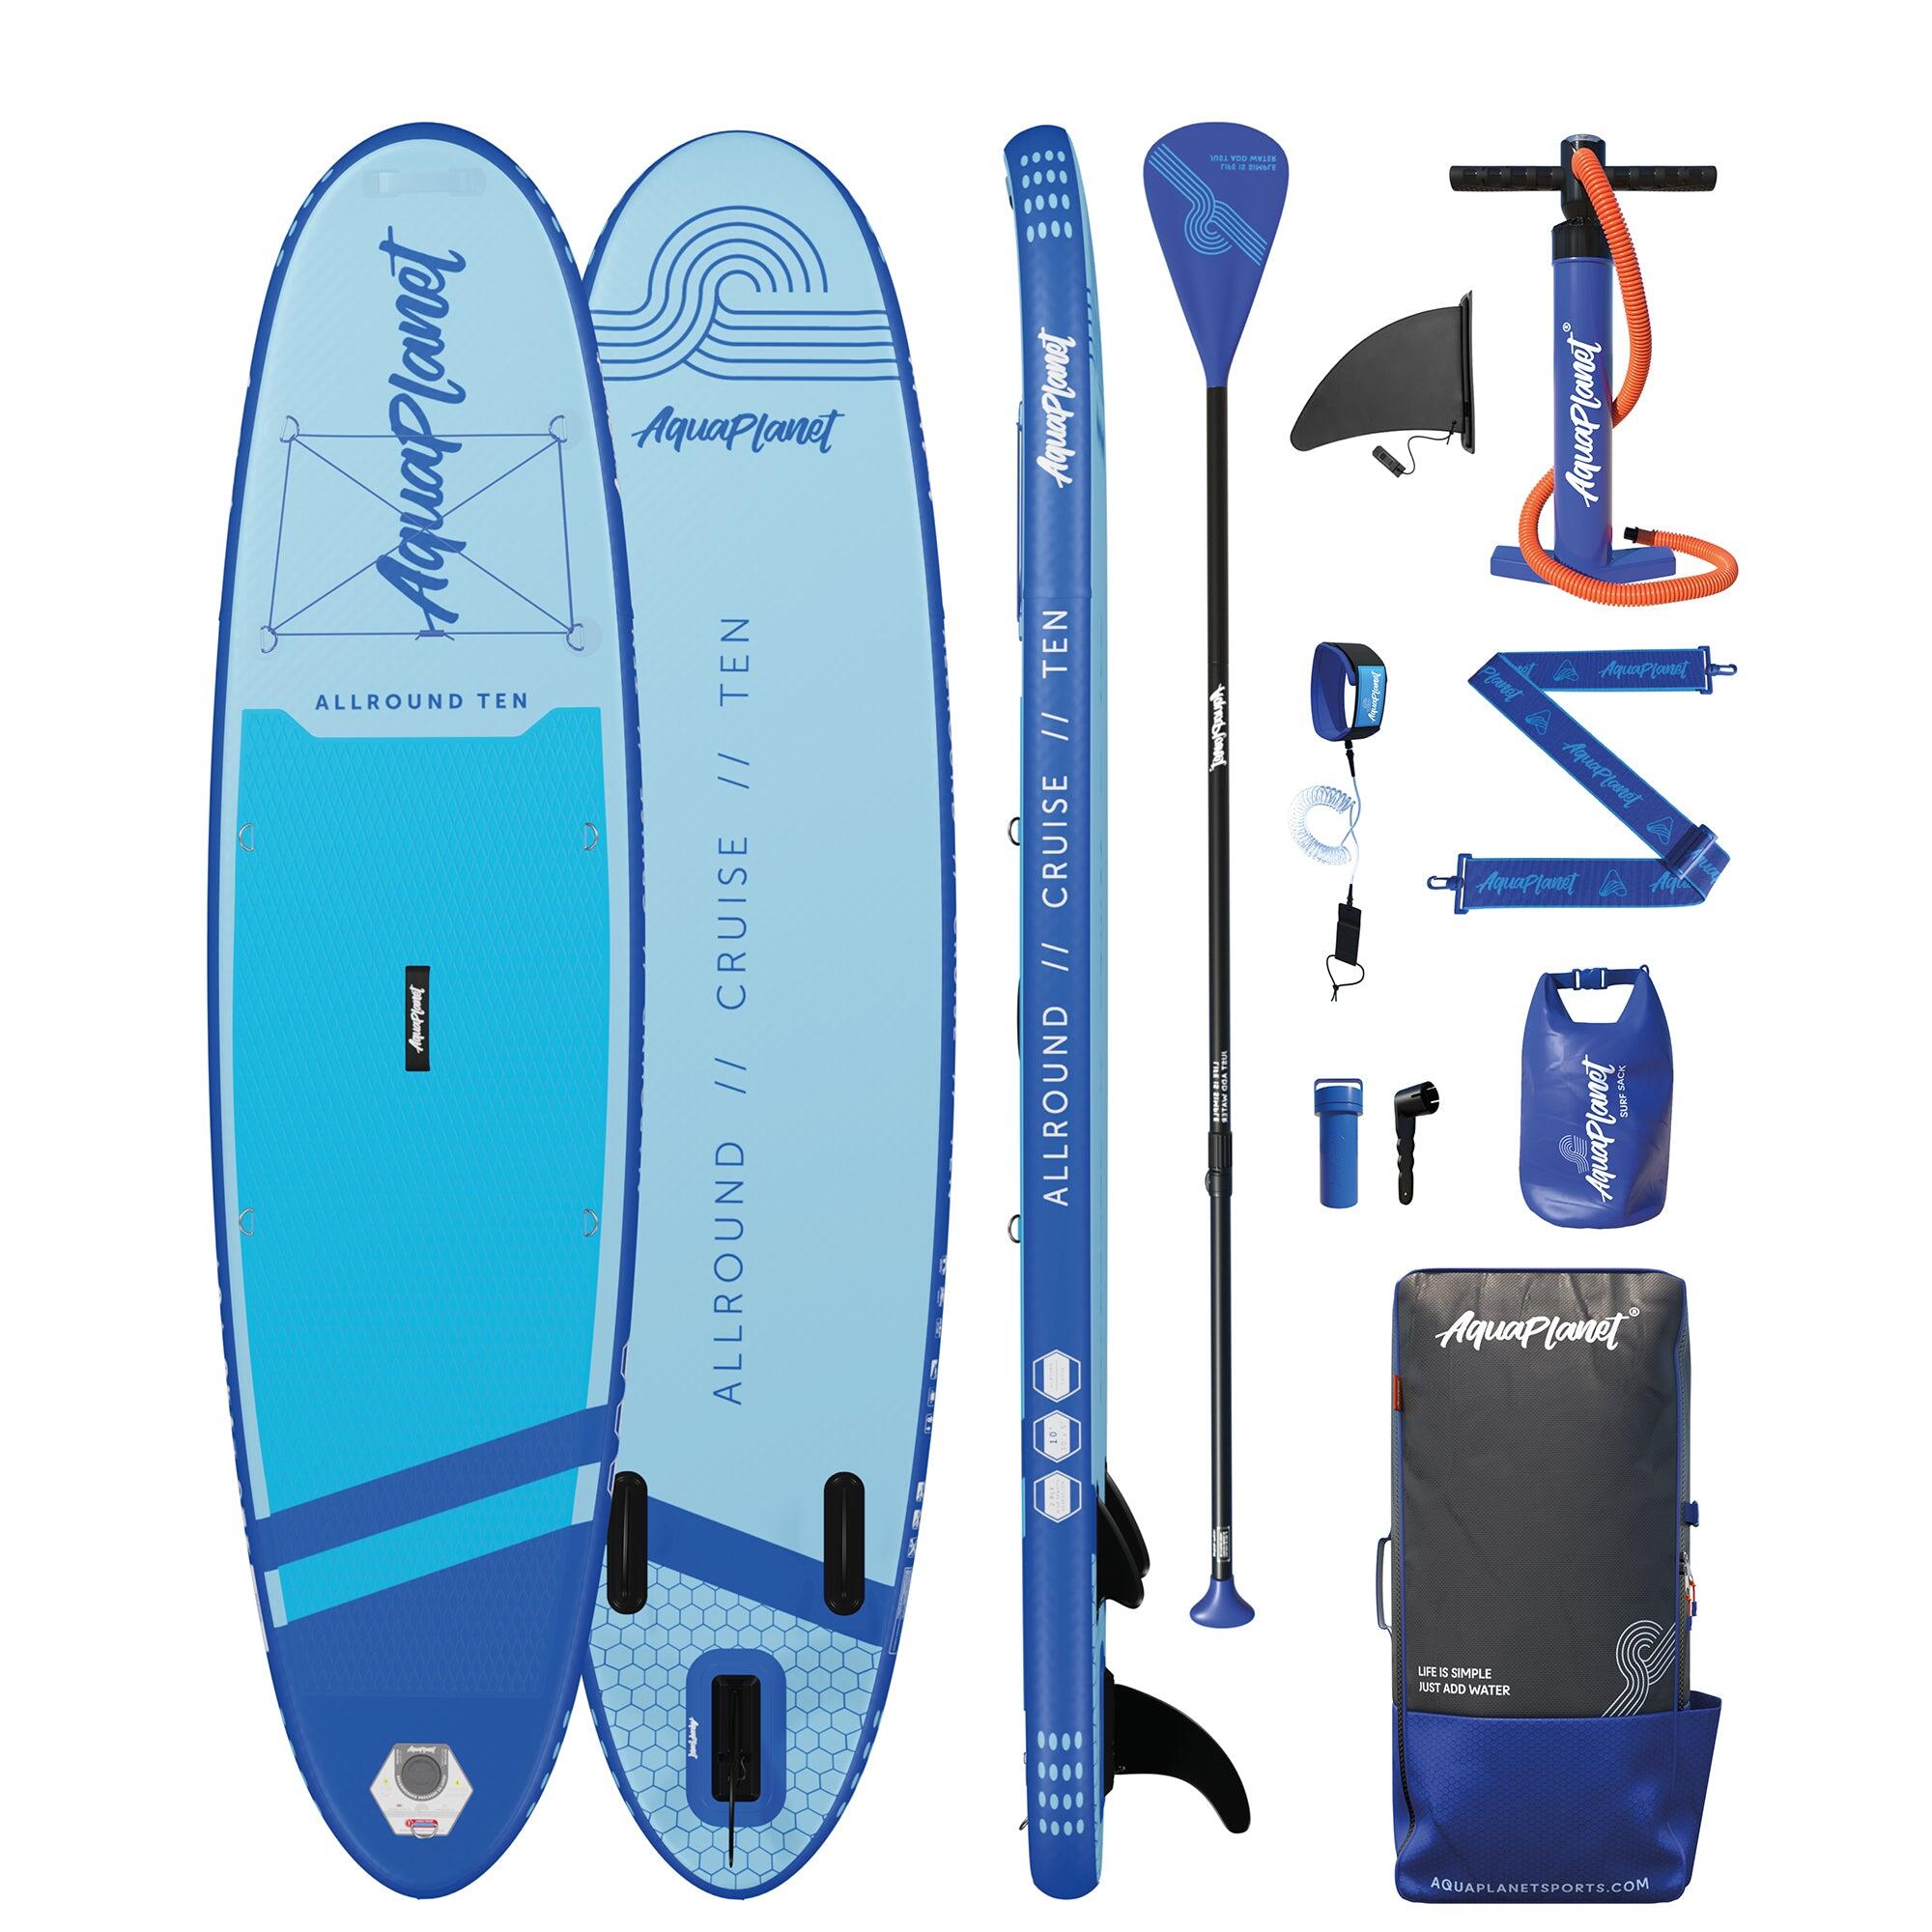 AQUAPLANET Aquaplanet ALLROUND TEN 10’ Inflatable Paddle Board Package - Blue